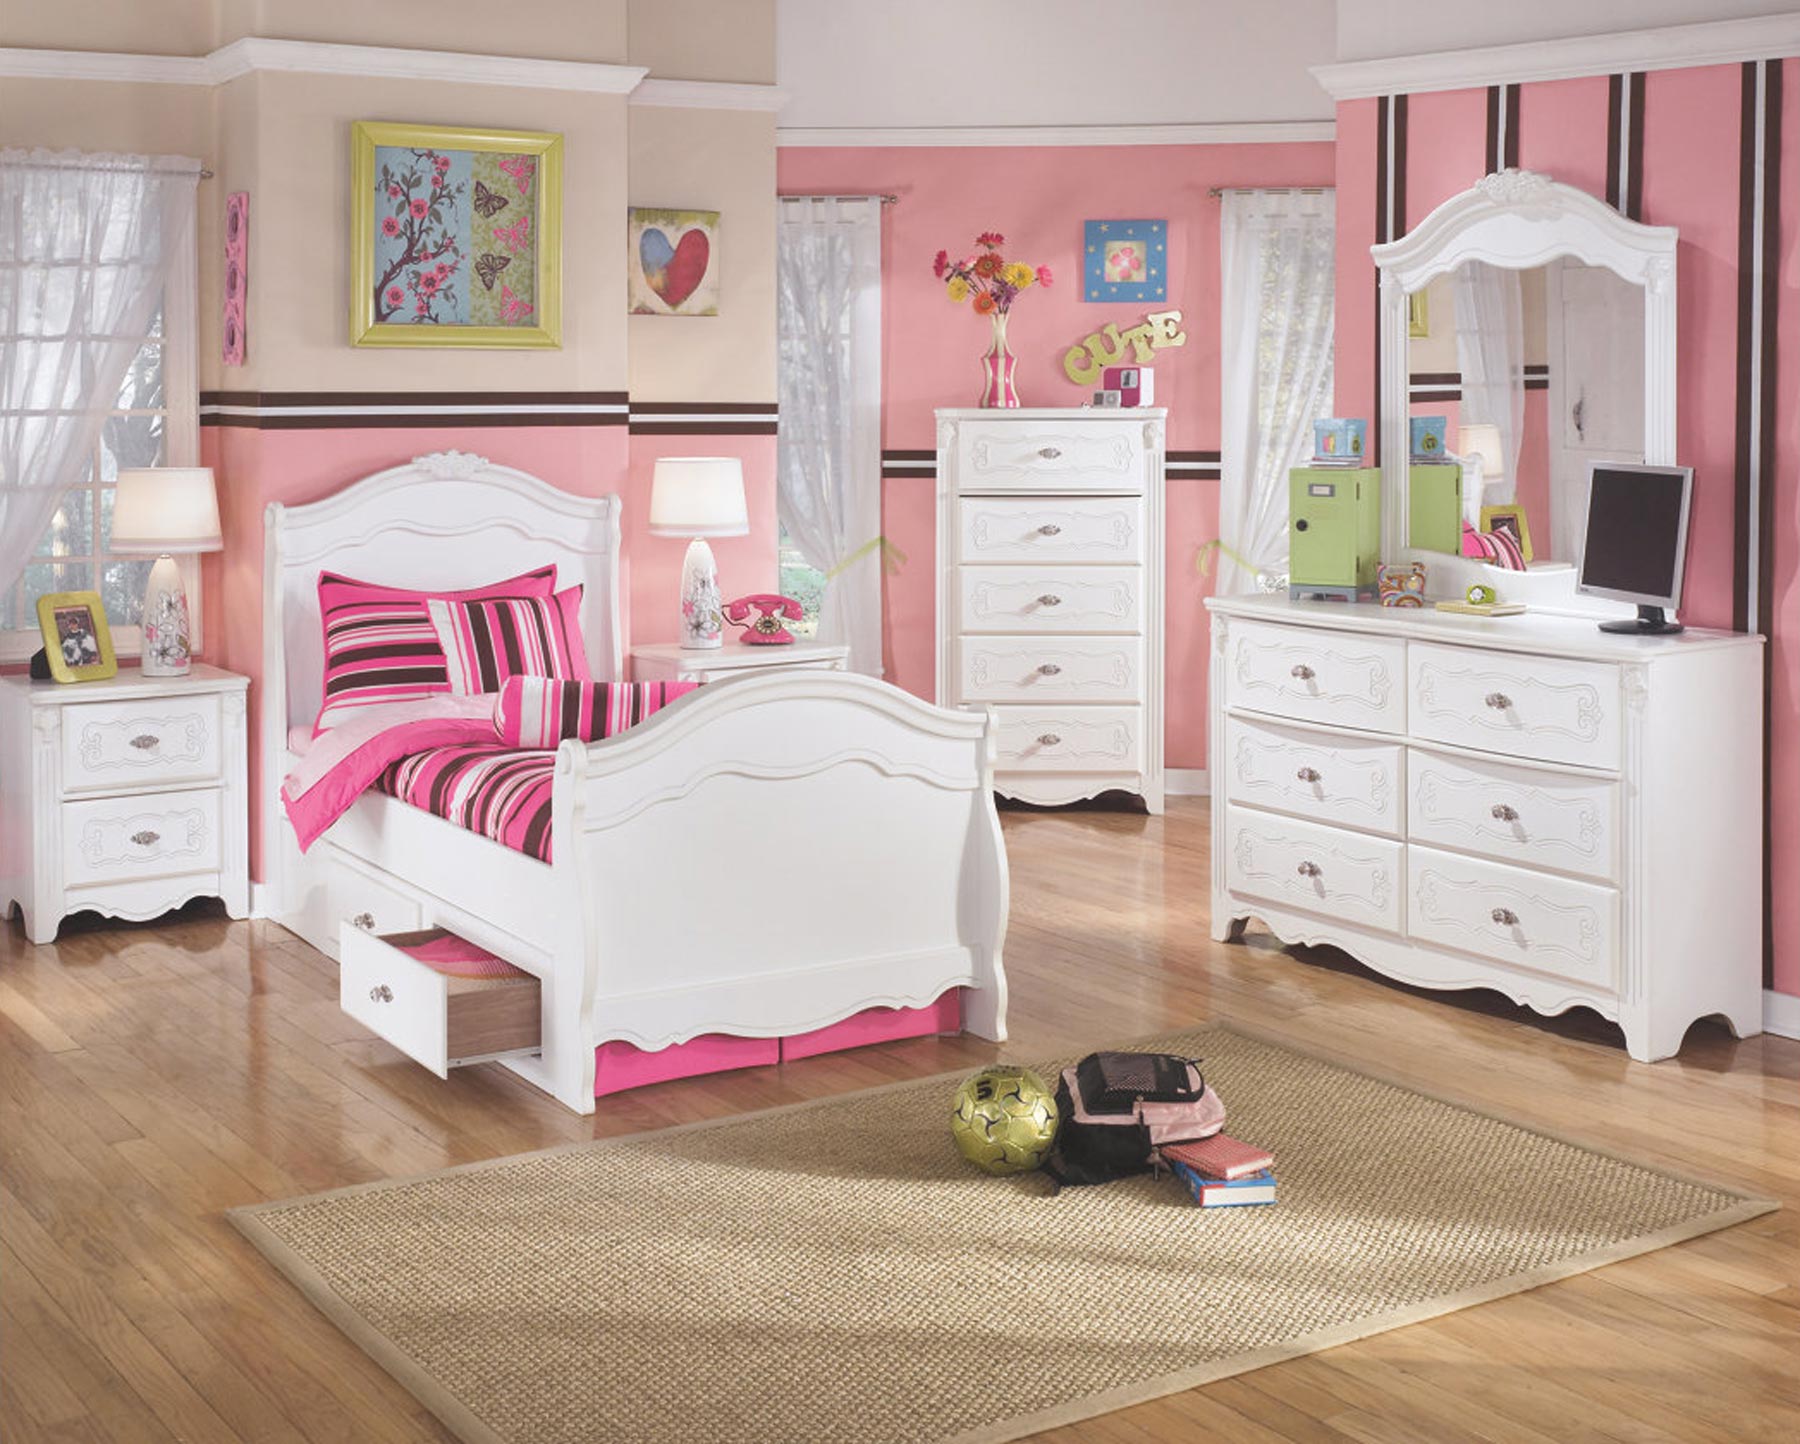 Exquisite 6 Piece Bedroom Set By Ashley Furniture